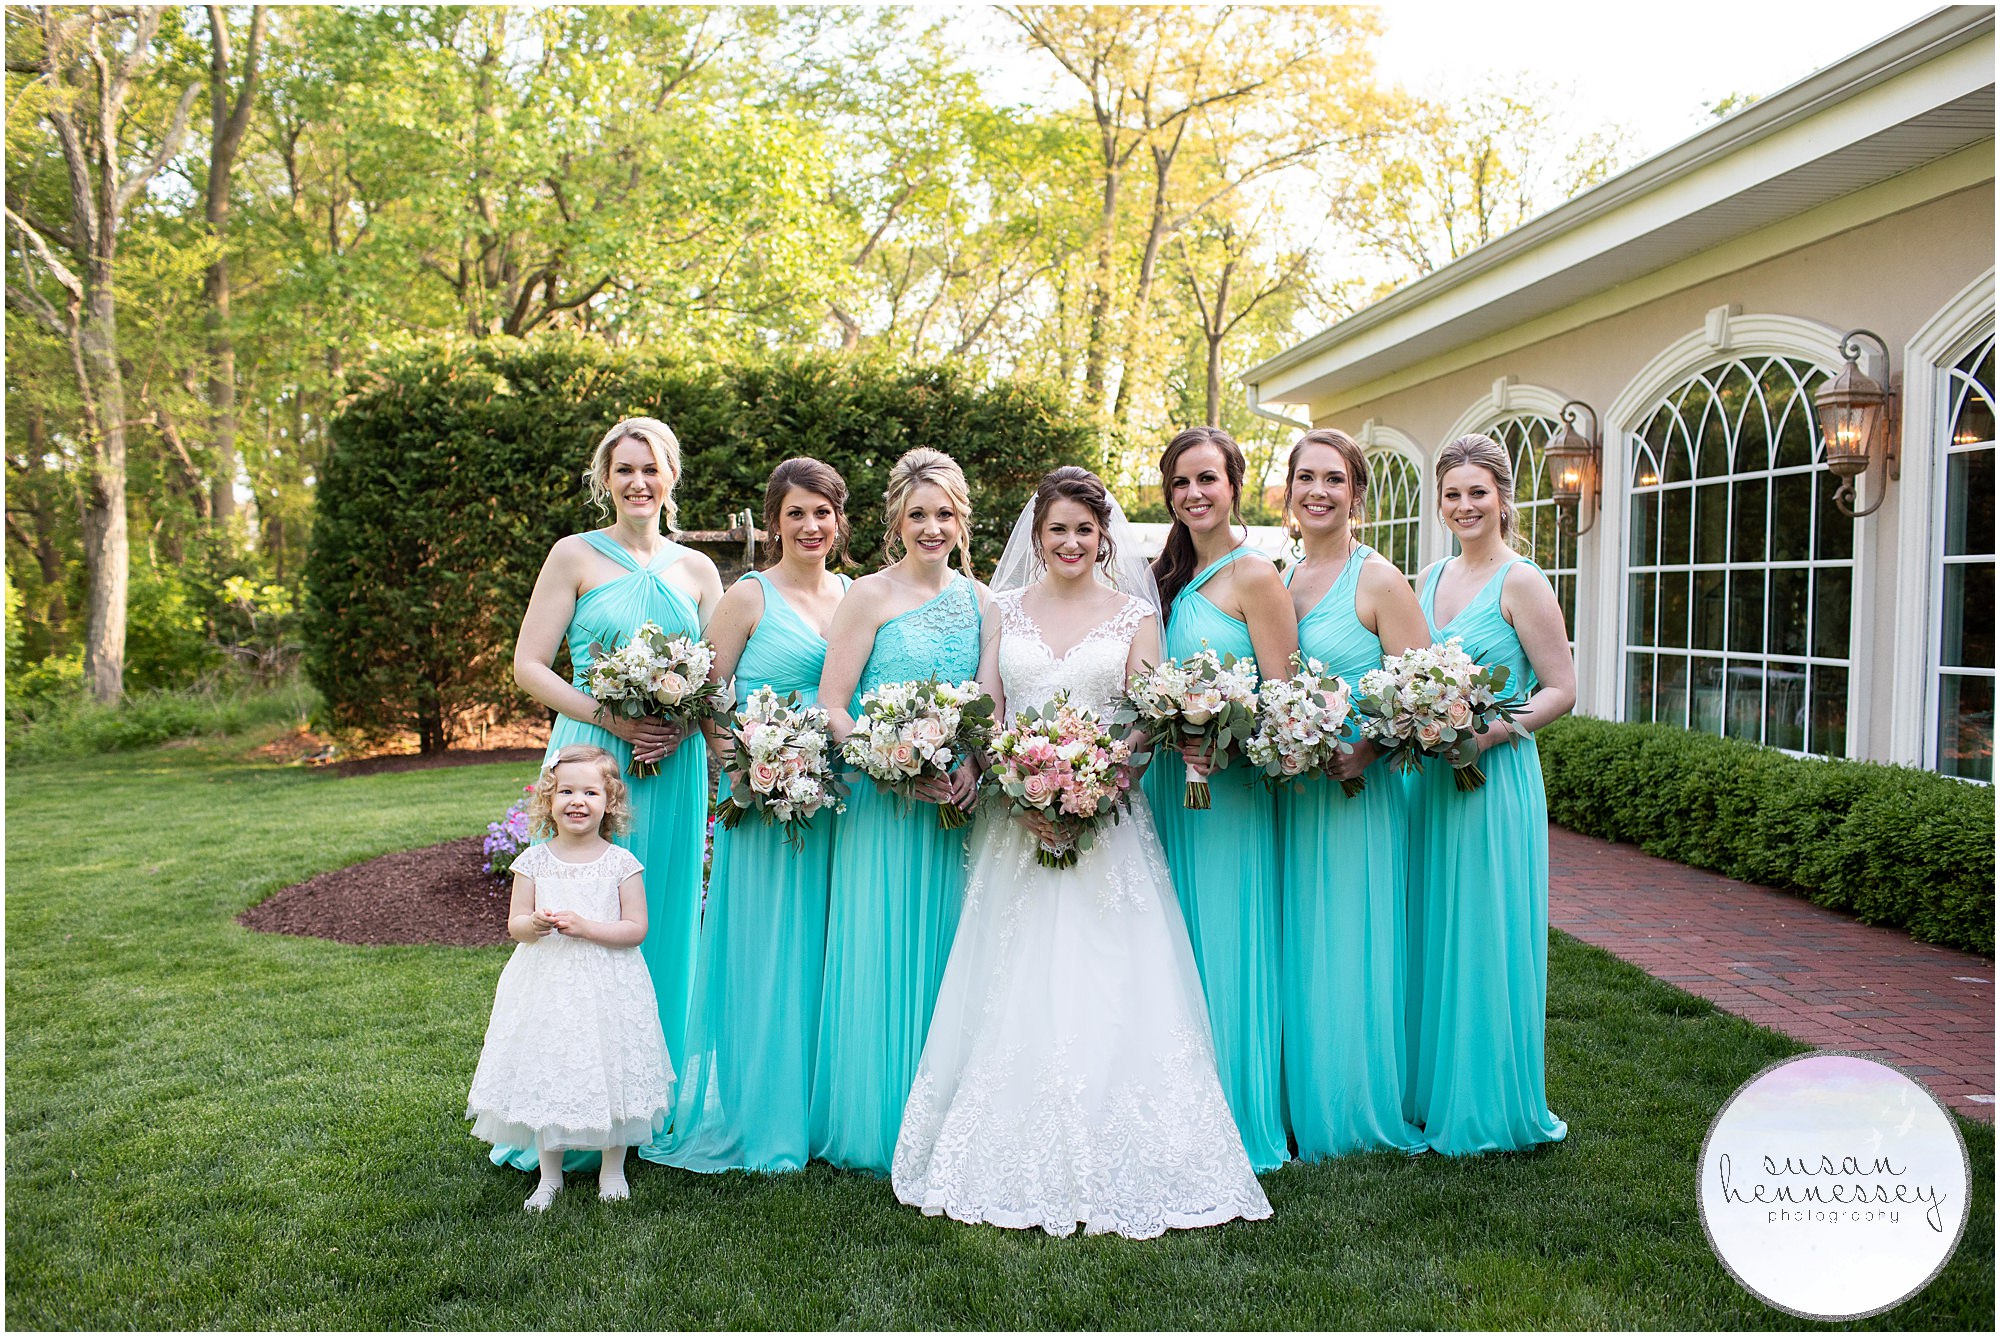 A bride, bridesmaids and flower girl dressed in David's Bridal gowns.